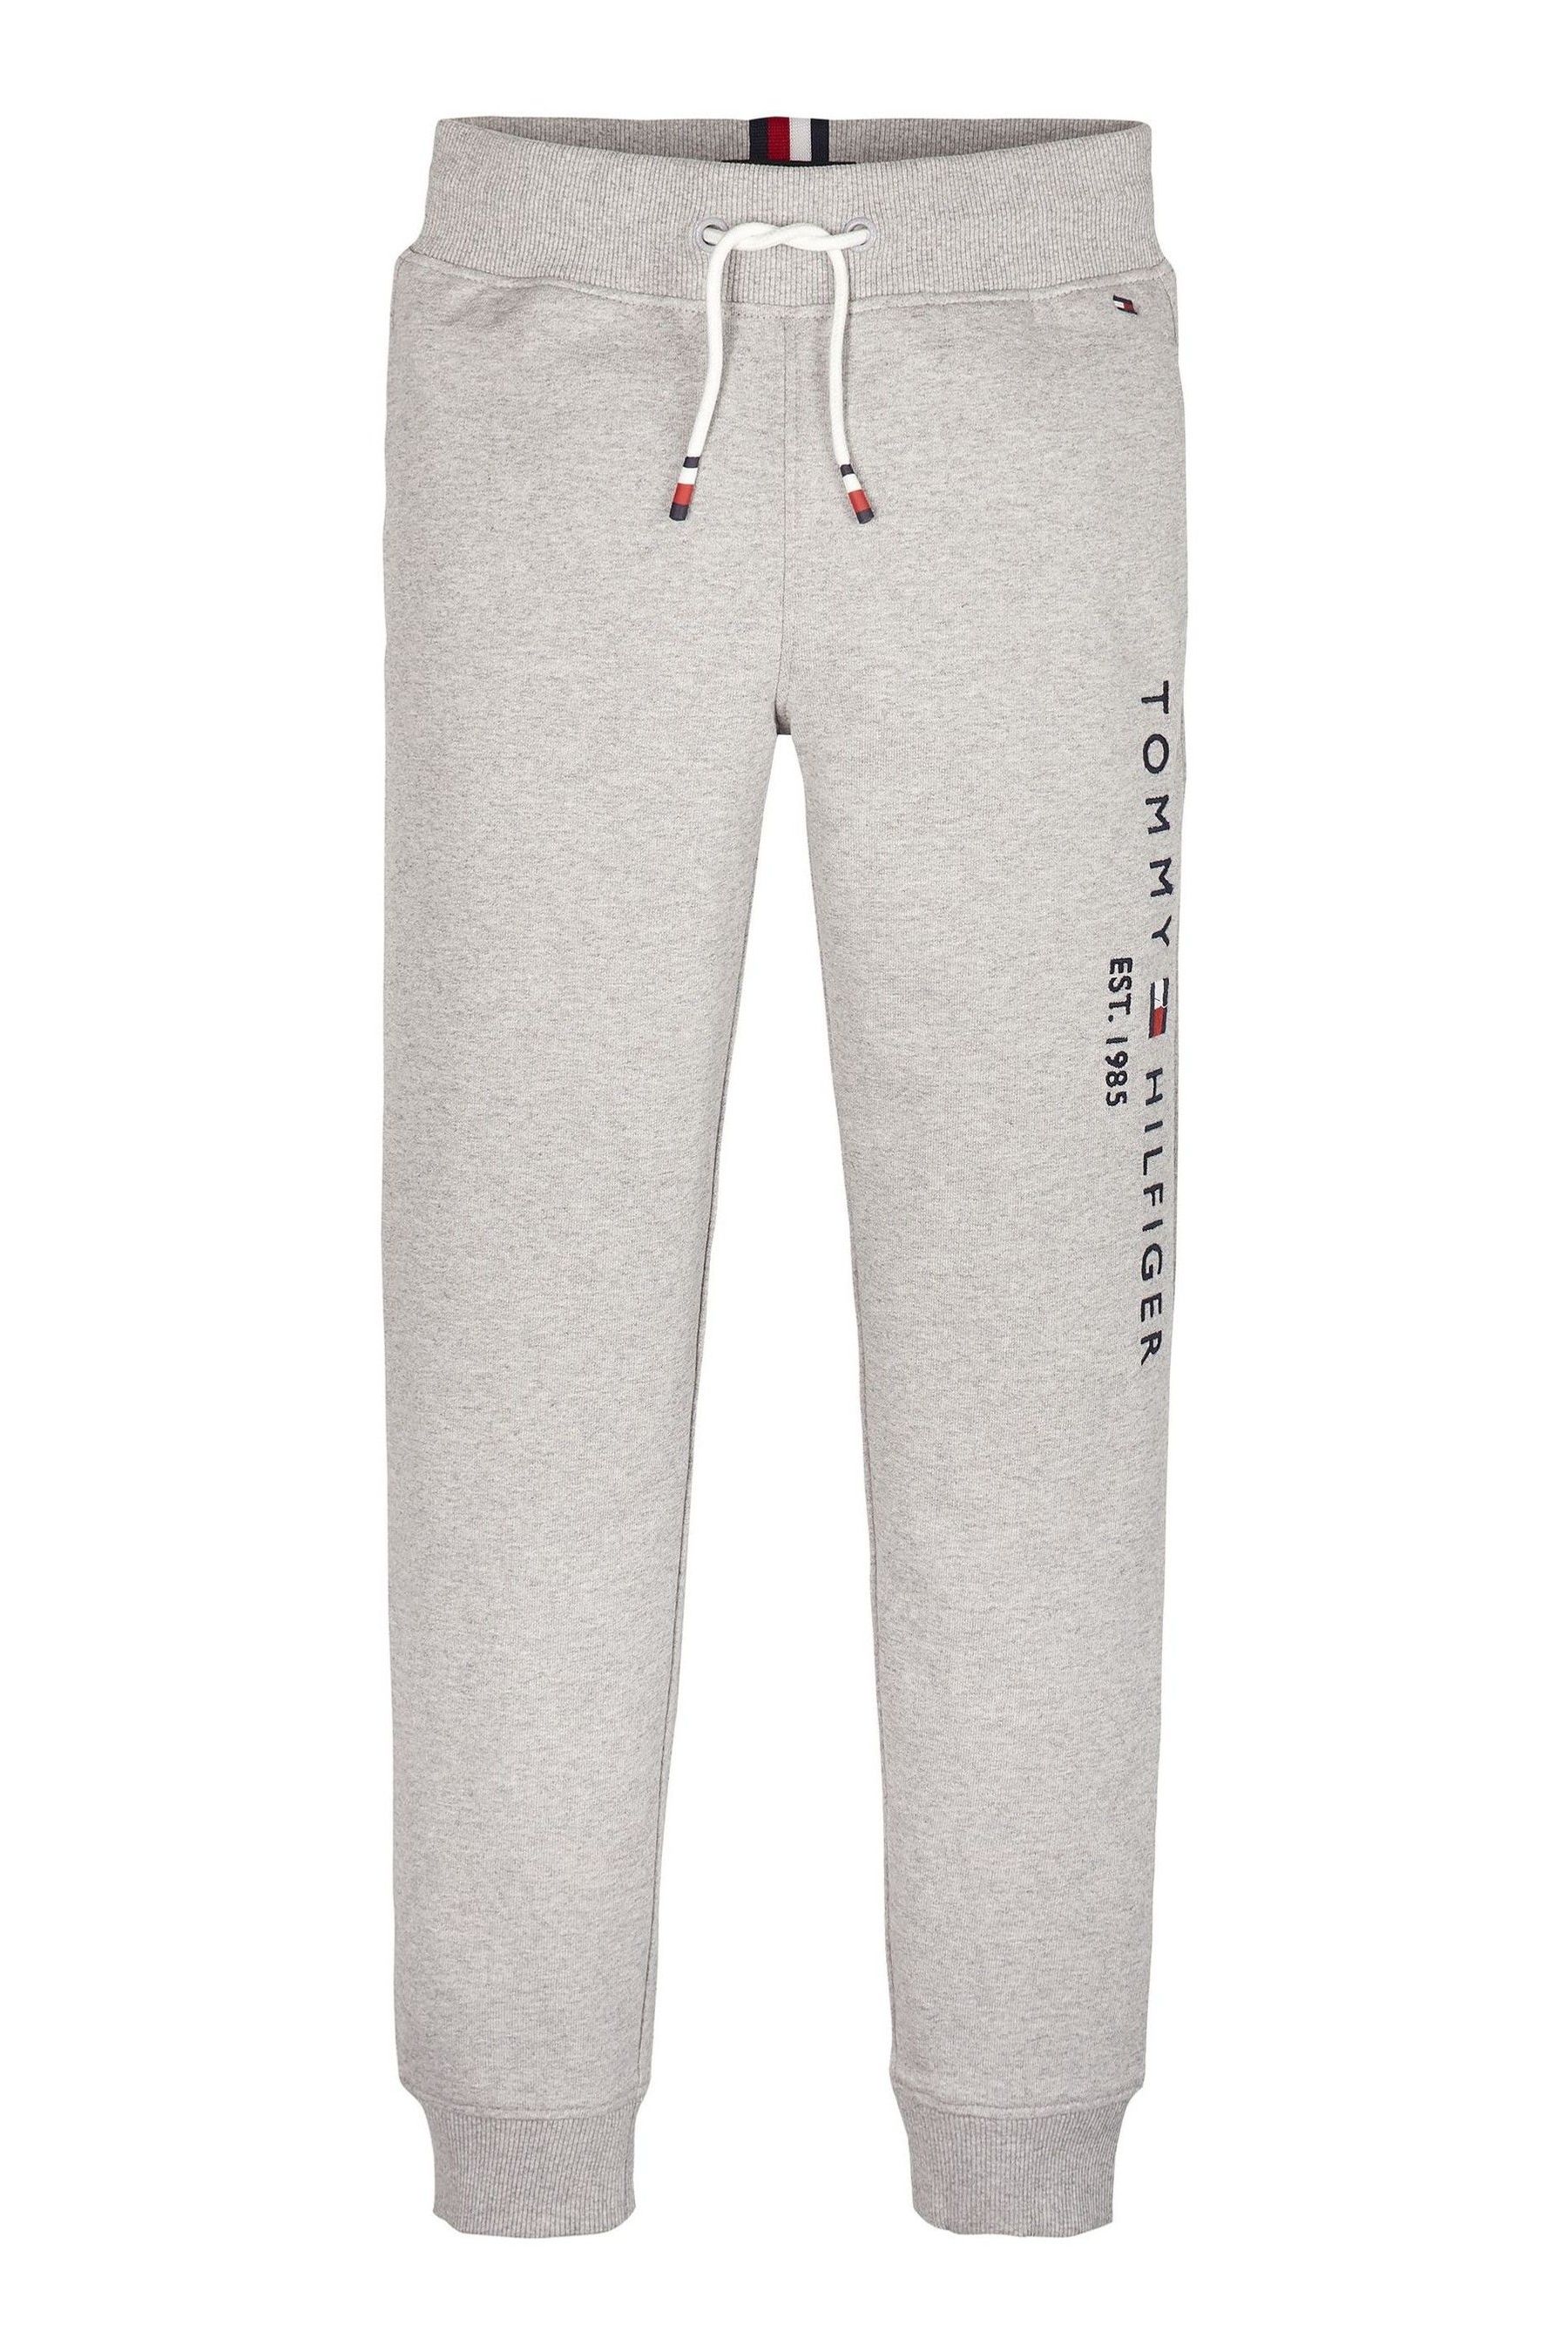 Buy Tommy Hilfiger Grey ESSENTIAL SWEATPANTS from the Next UK online shop